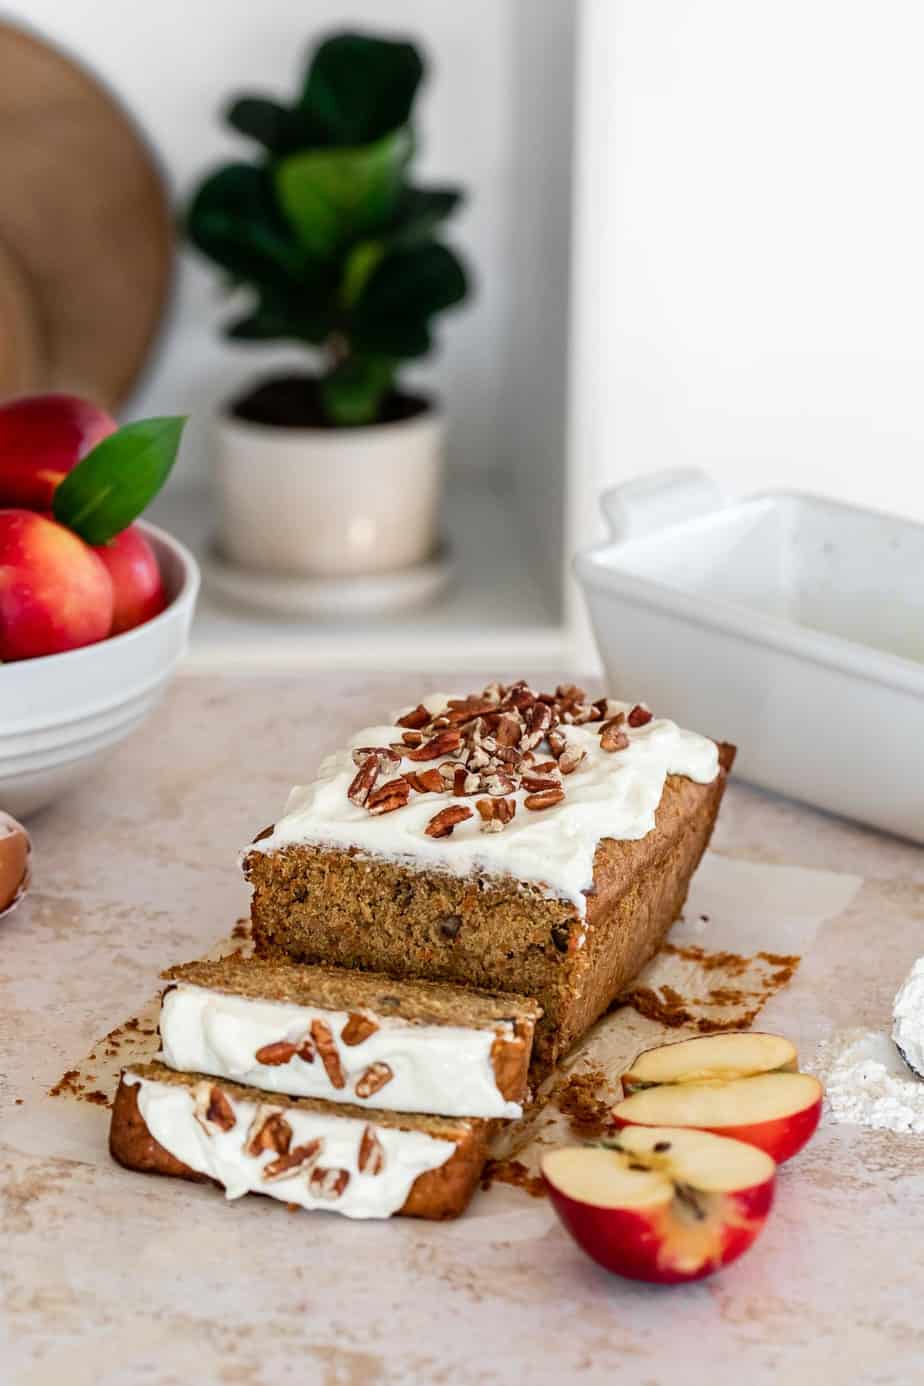 A carrot and apple loaf with frosting and chopped nuts.